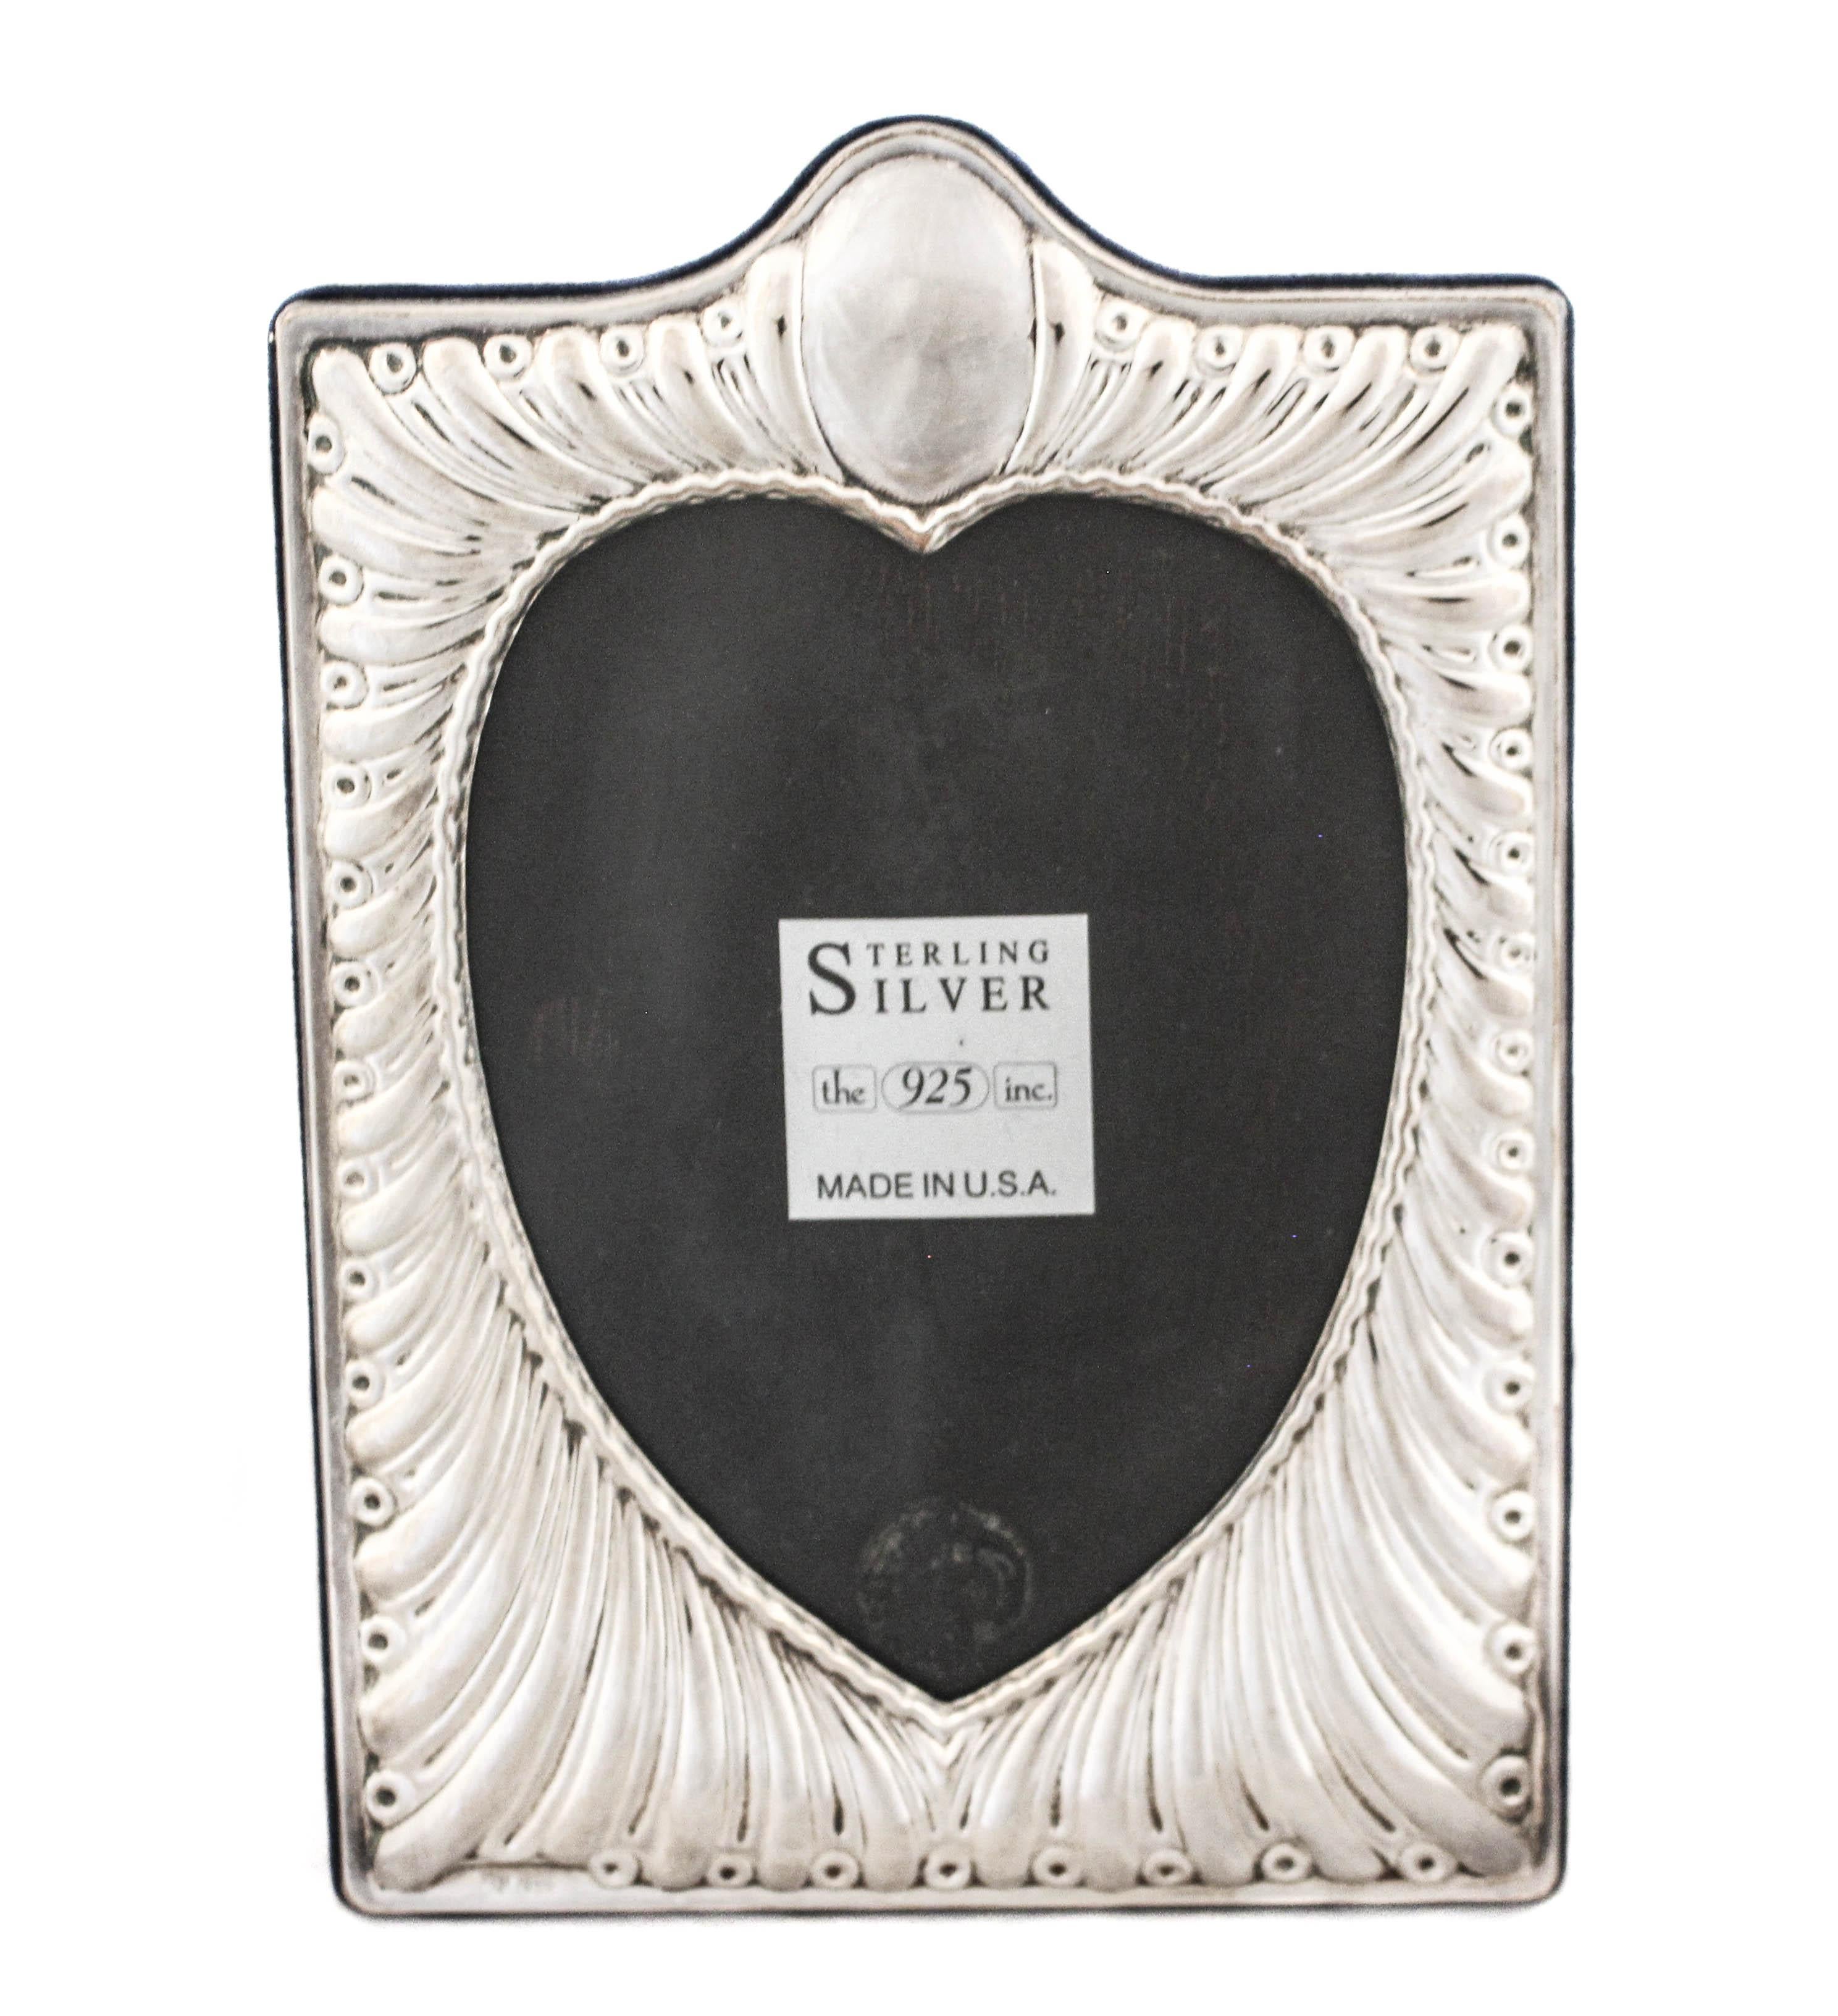 Love is in the air and this sterling silver frame will keep it there. What better way to keep someone you love in sight than in a heart shaped frame?